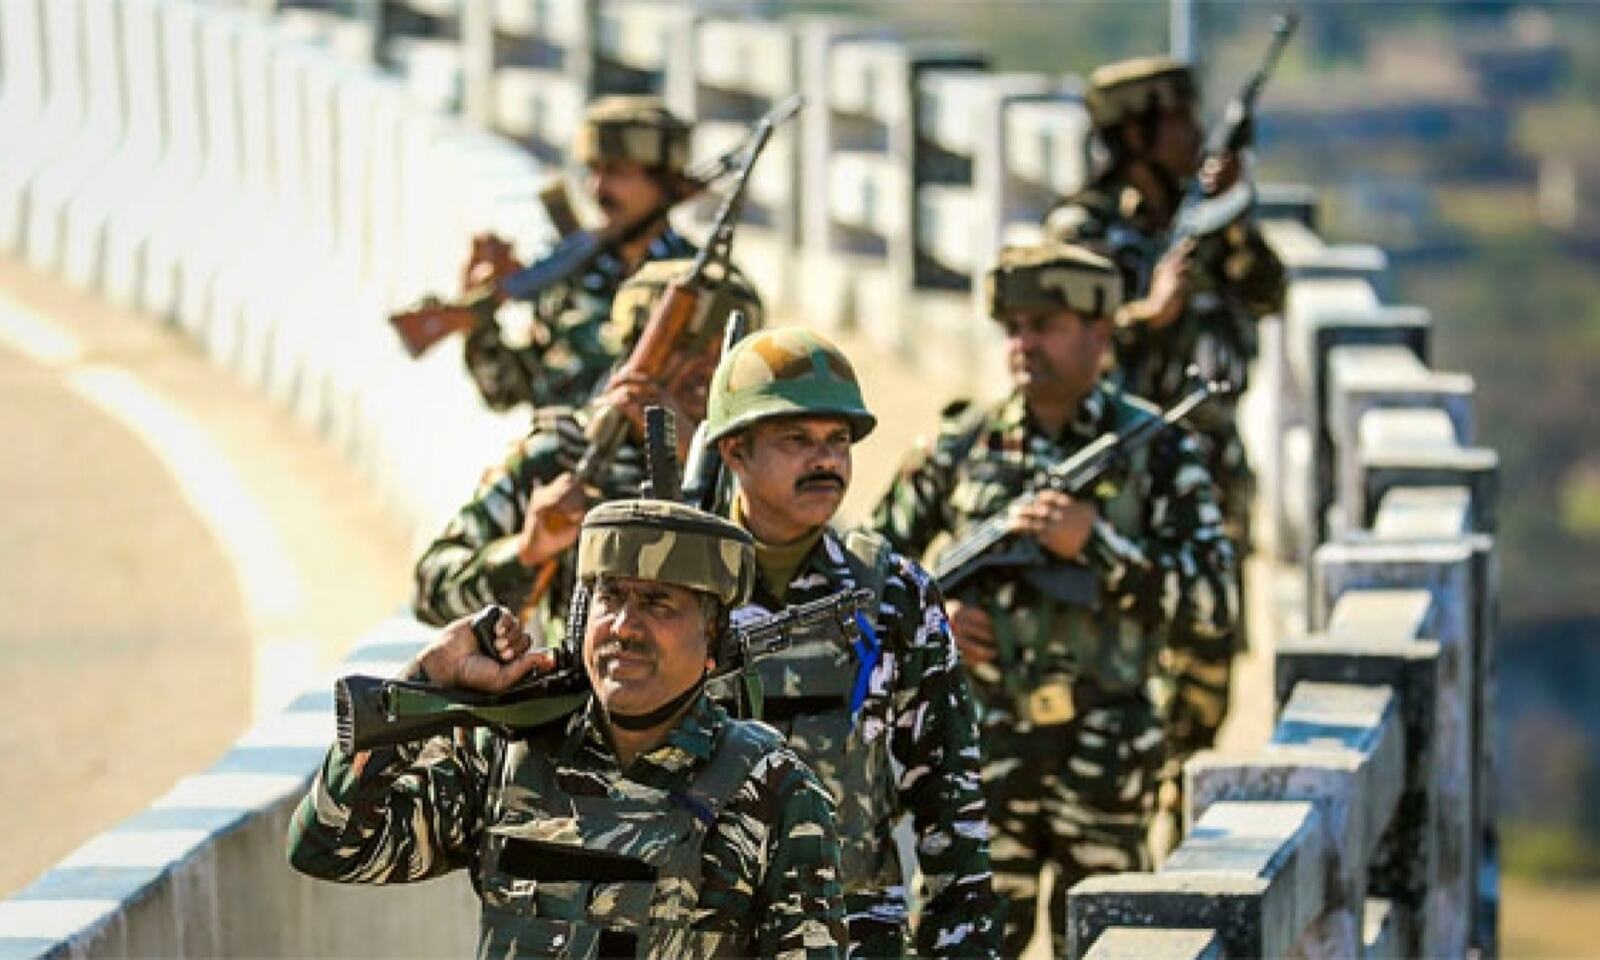 2-crpf-personnel-killed-in-manipurs-naransena-in-an-attack-by-militants